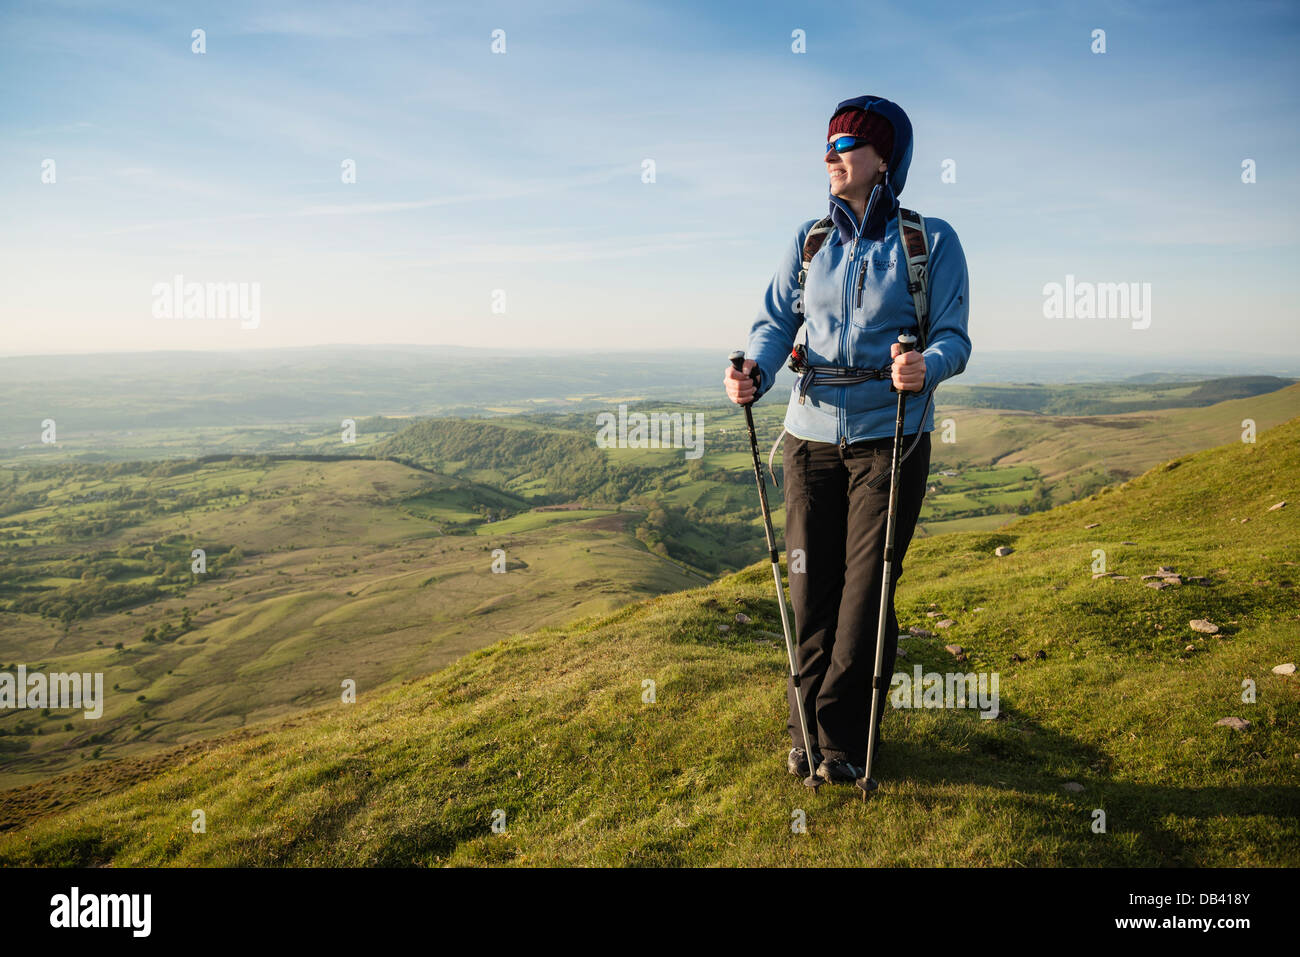 Female hiker on summit of Twmpa - Lord Hereford's Knob, Black Mountains, Brecon Beacons national park, Wales Stock Photo